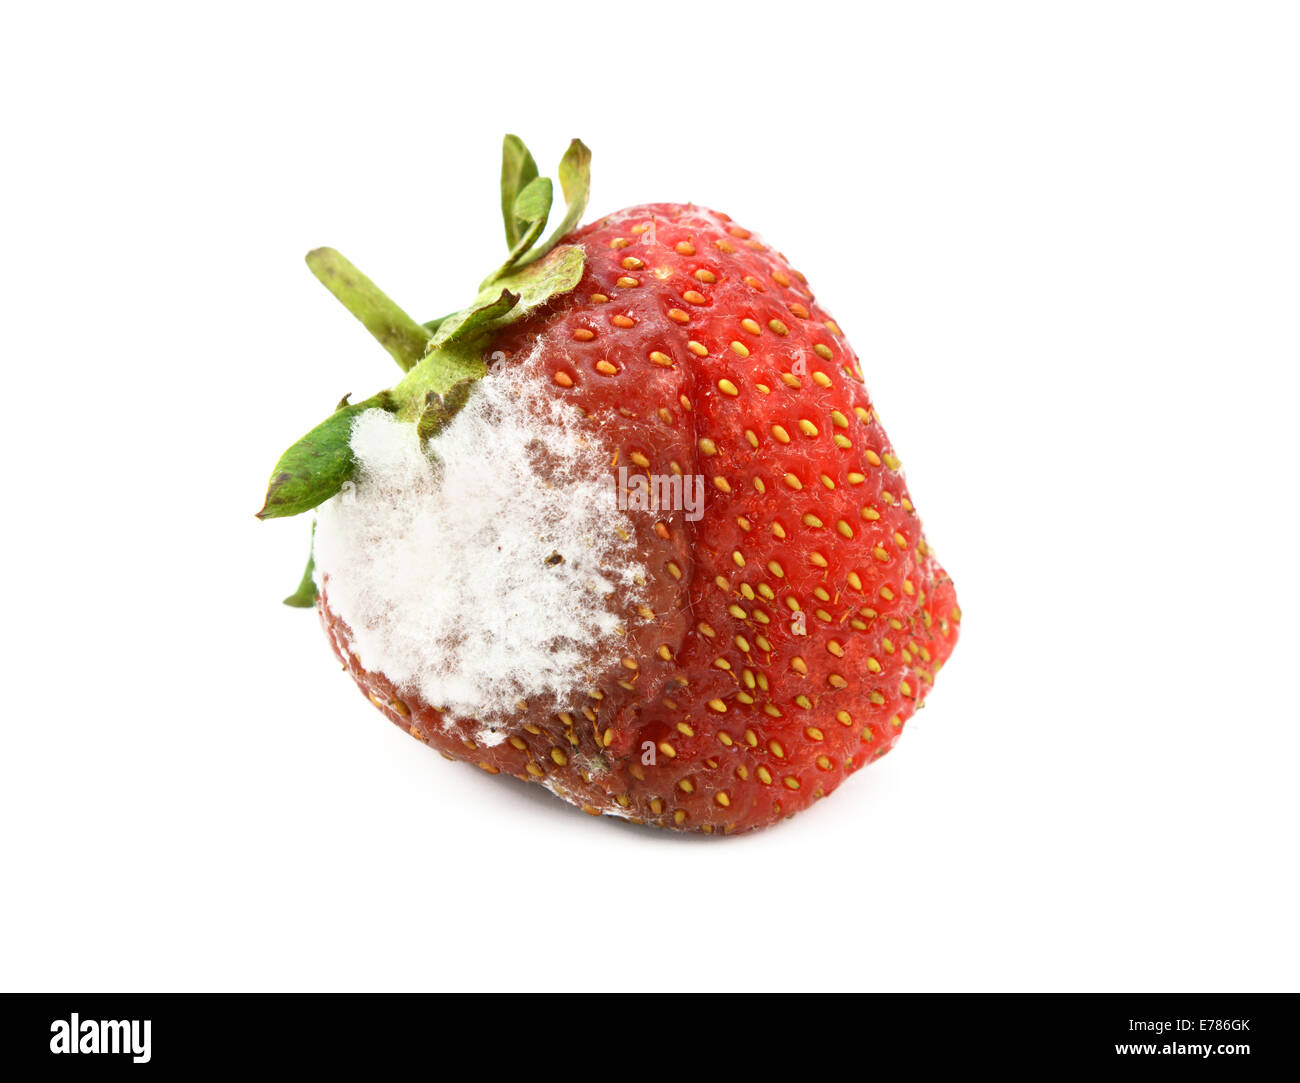 Red strawberry with a patch of mould, isolated on a white background Stock Photo